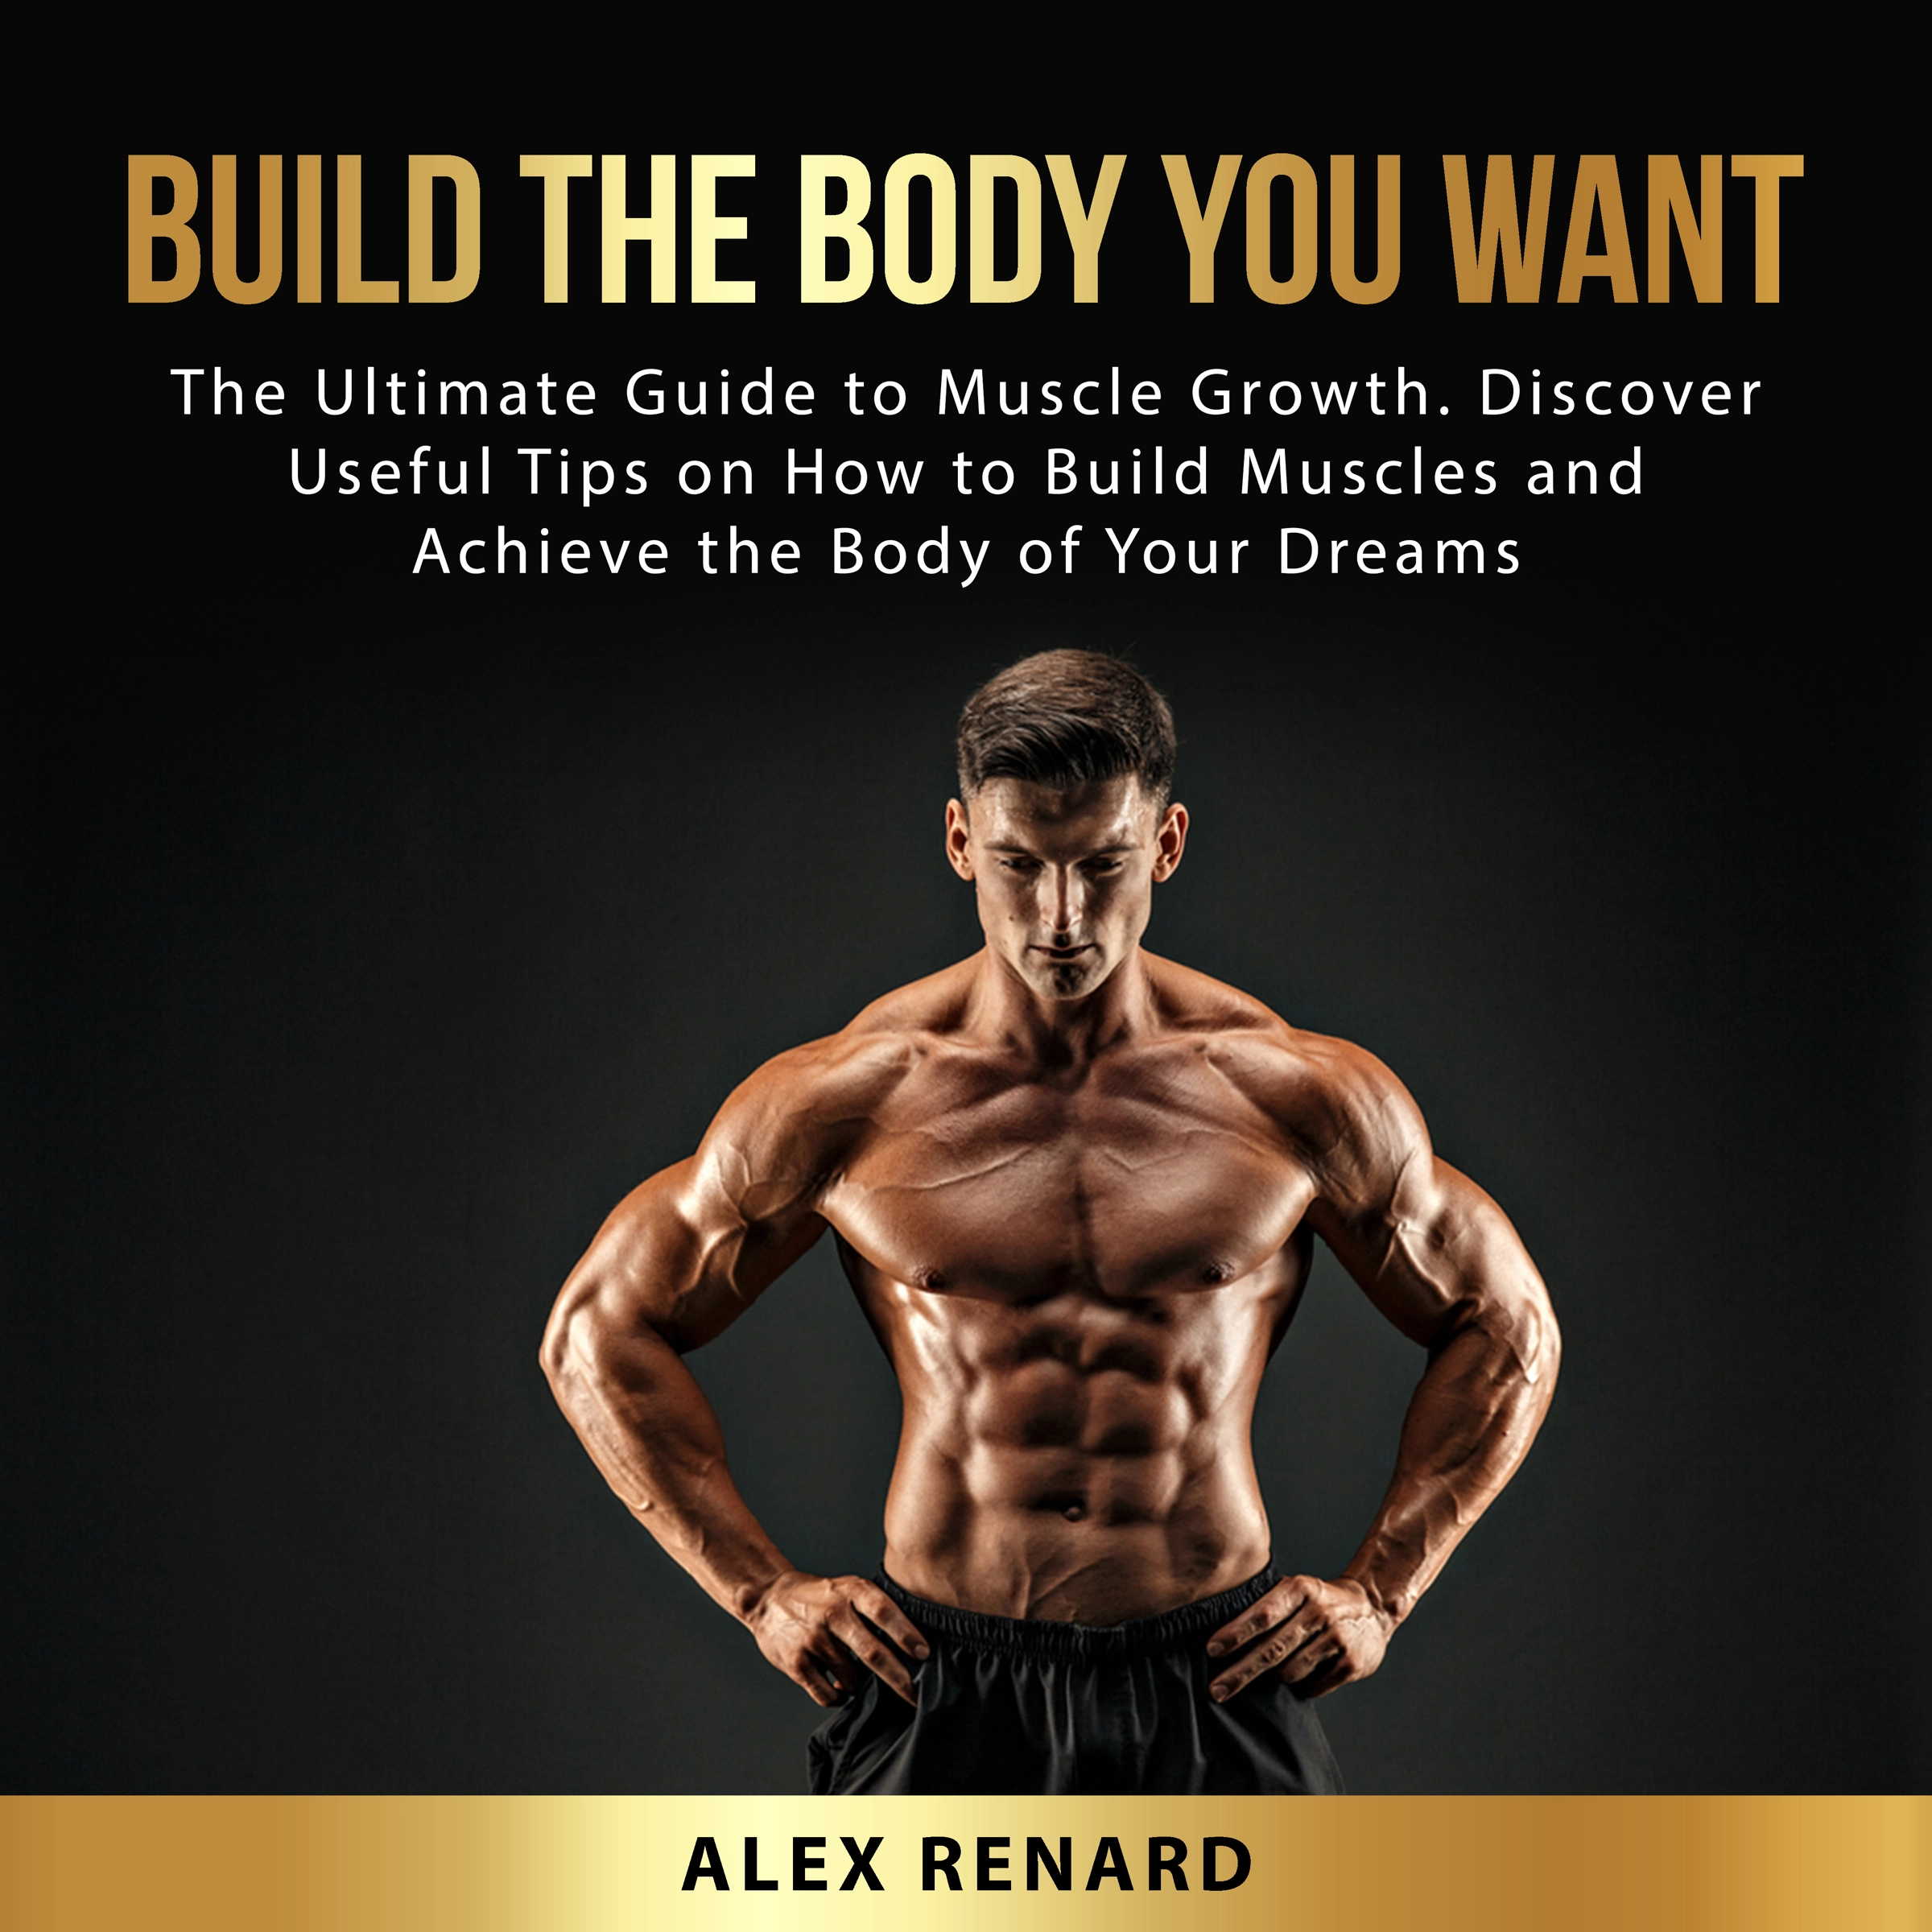 Build the Body You Want Audiobook by Alex Renard